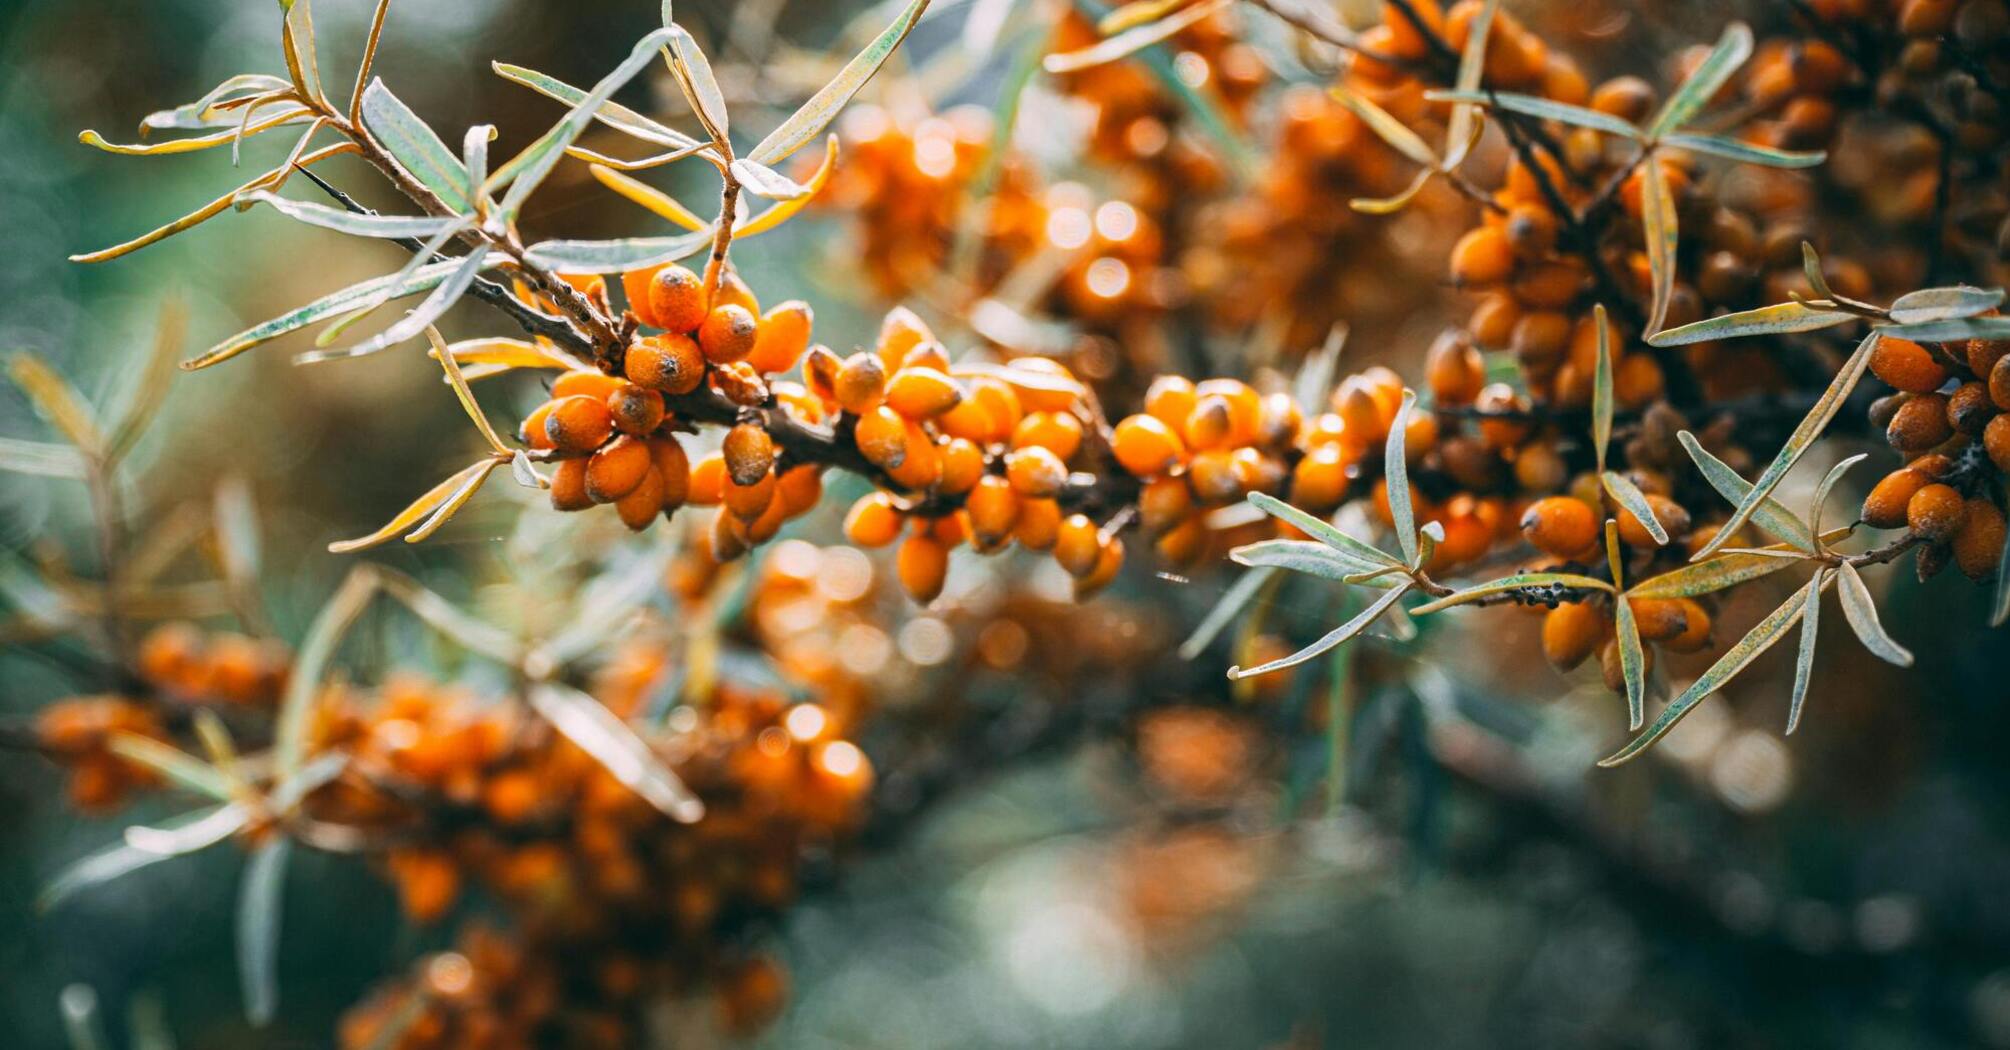 How to pick sea buckthorn correctly?